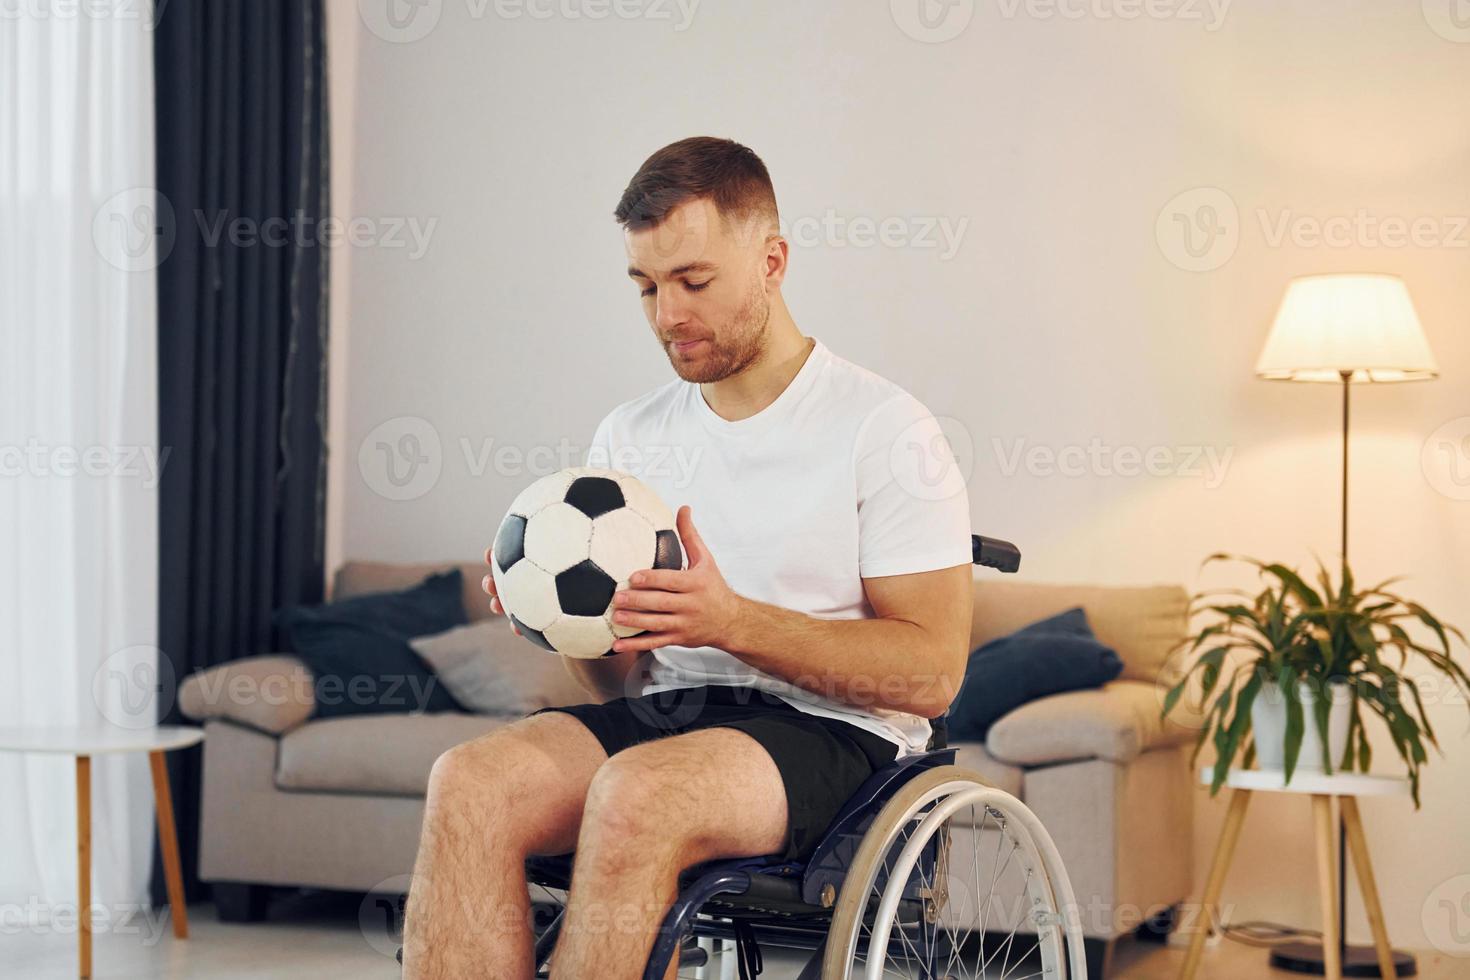 With soccer ball. Disabled man in wheelchair is at home photo